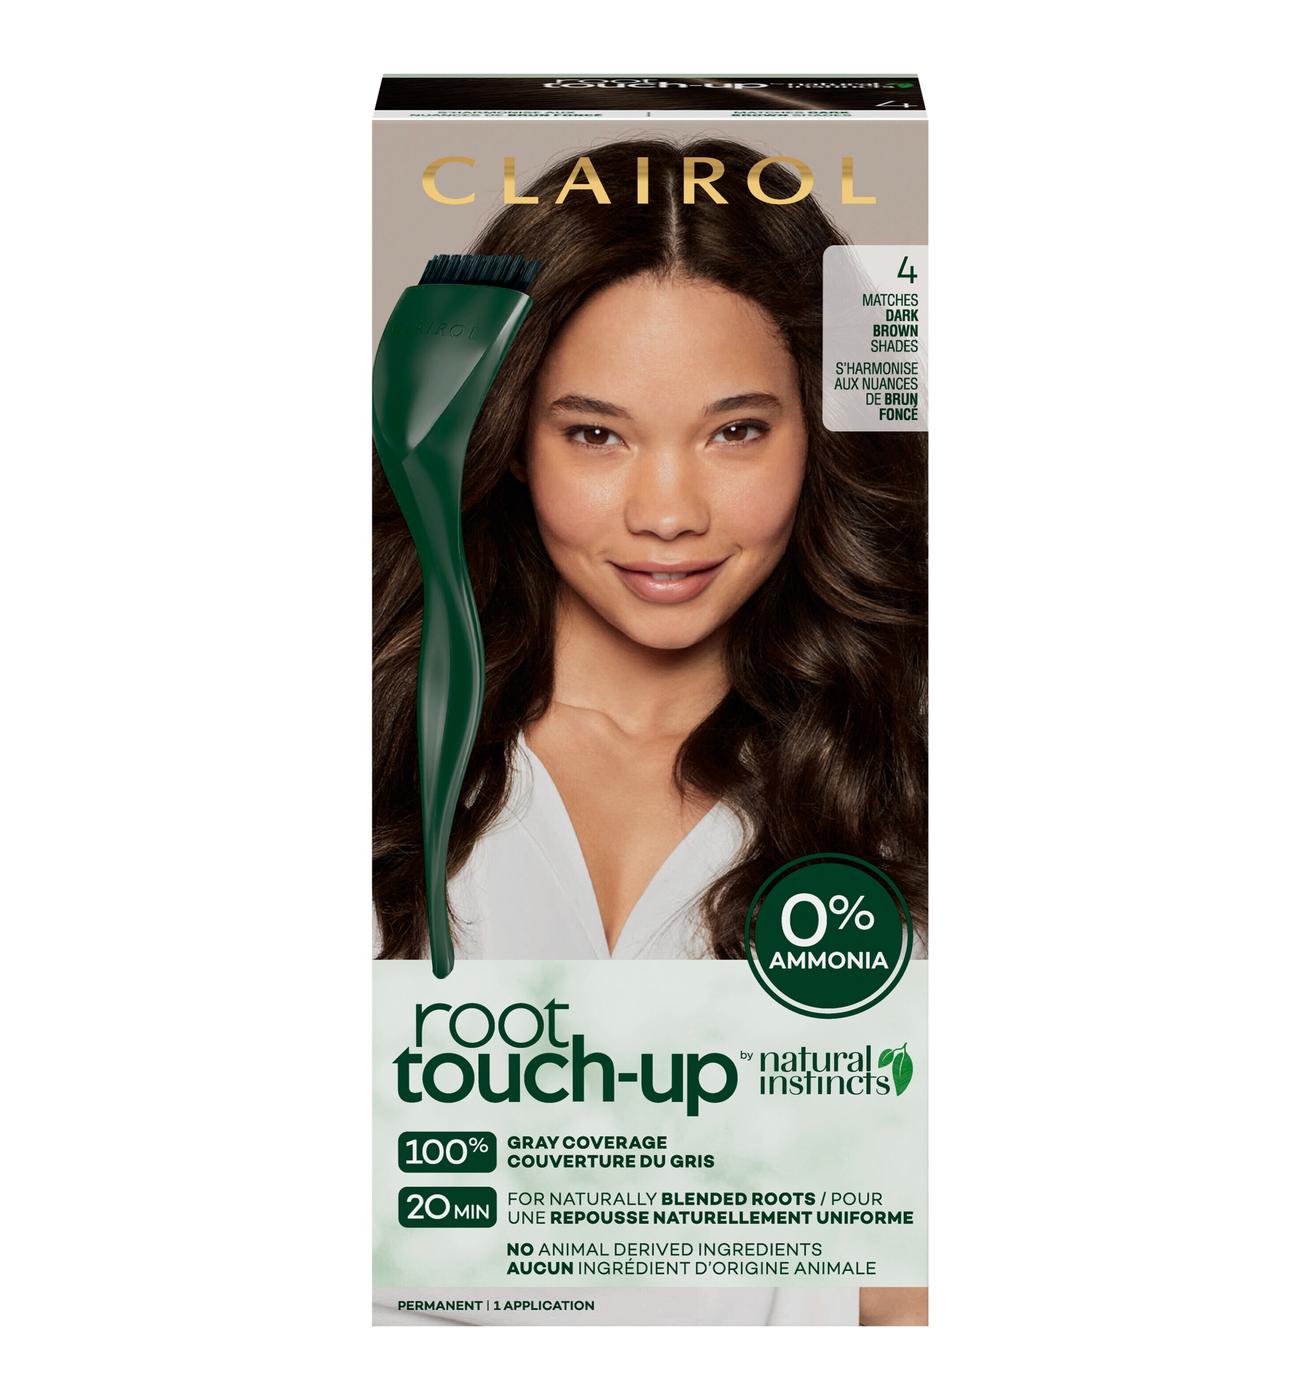 Clairol Root Touch-Up by Natural Instincts Ammonia-Free Permanent Hair Color 4 Matches Dark Brown Shades; image 1 of 4